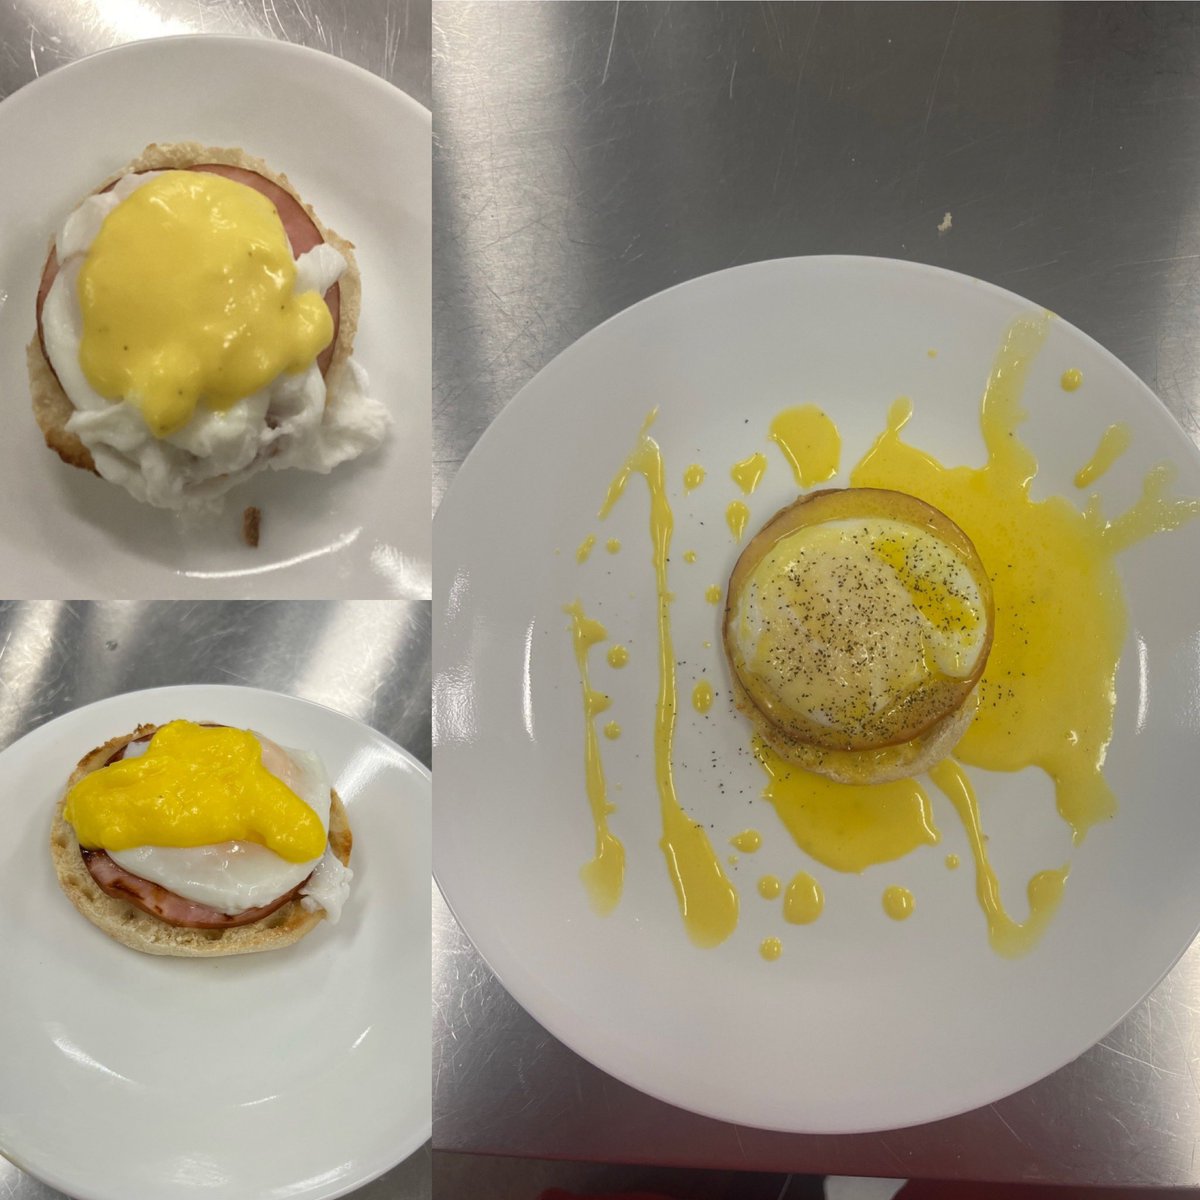 EGGcellent work by Culinary 3 students today who conquered the daunting task of making hollandaise sauce and poaching eggs to start off our mother sauces unit!